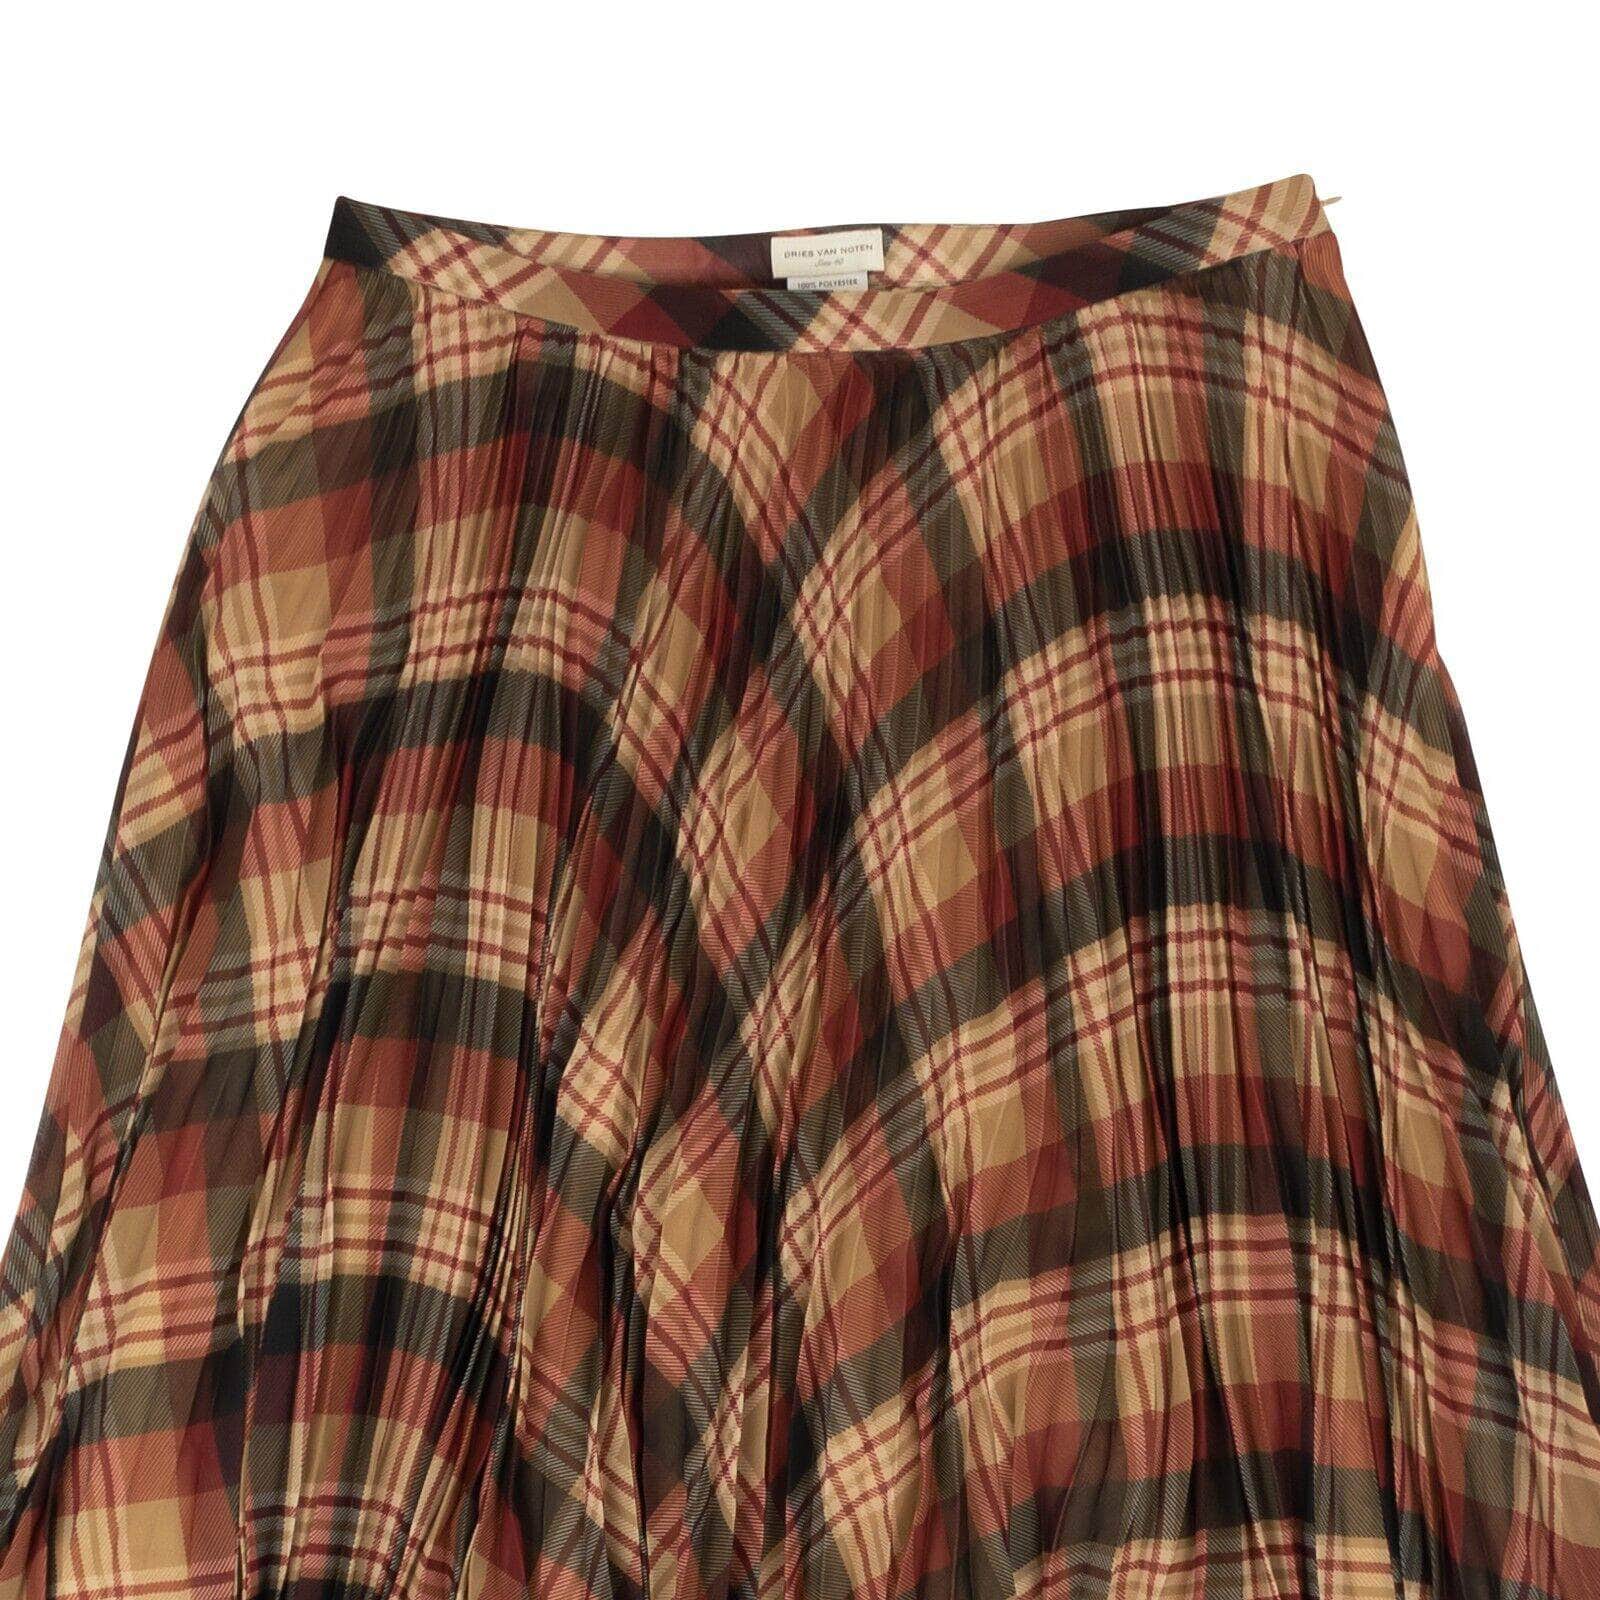 Dries Van Noten 1000-2000, channelenable-all, chicmi, couponcollection, dries-van-noten, gender-womens, main-clothing, size-38, size-40, womens-flared-skirts 38 / 202-10830-1228-976 Multicolor Sax Plaid Pleated Skirt 95-DVN-0029/38 95-DVN-0029/38